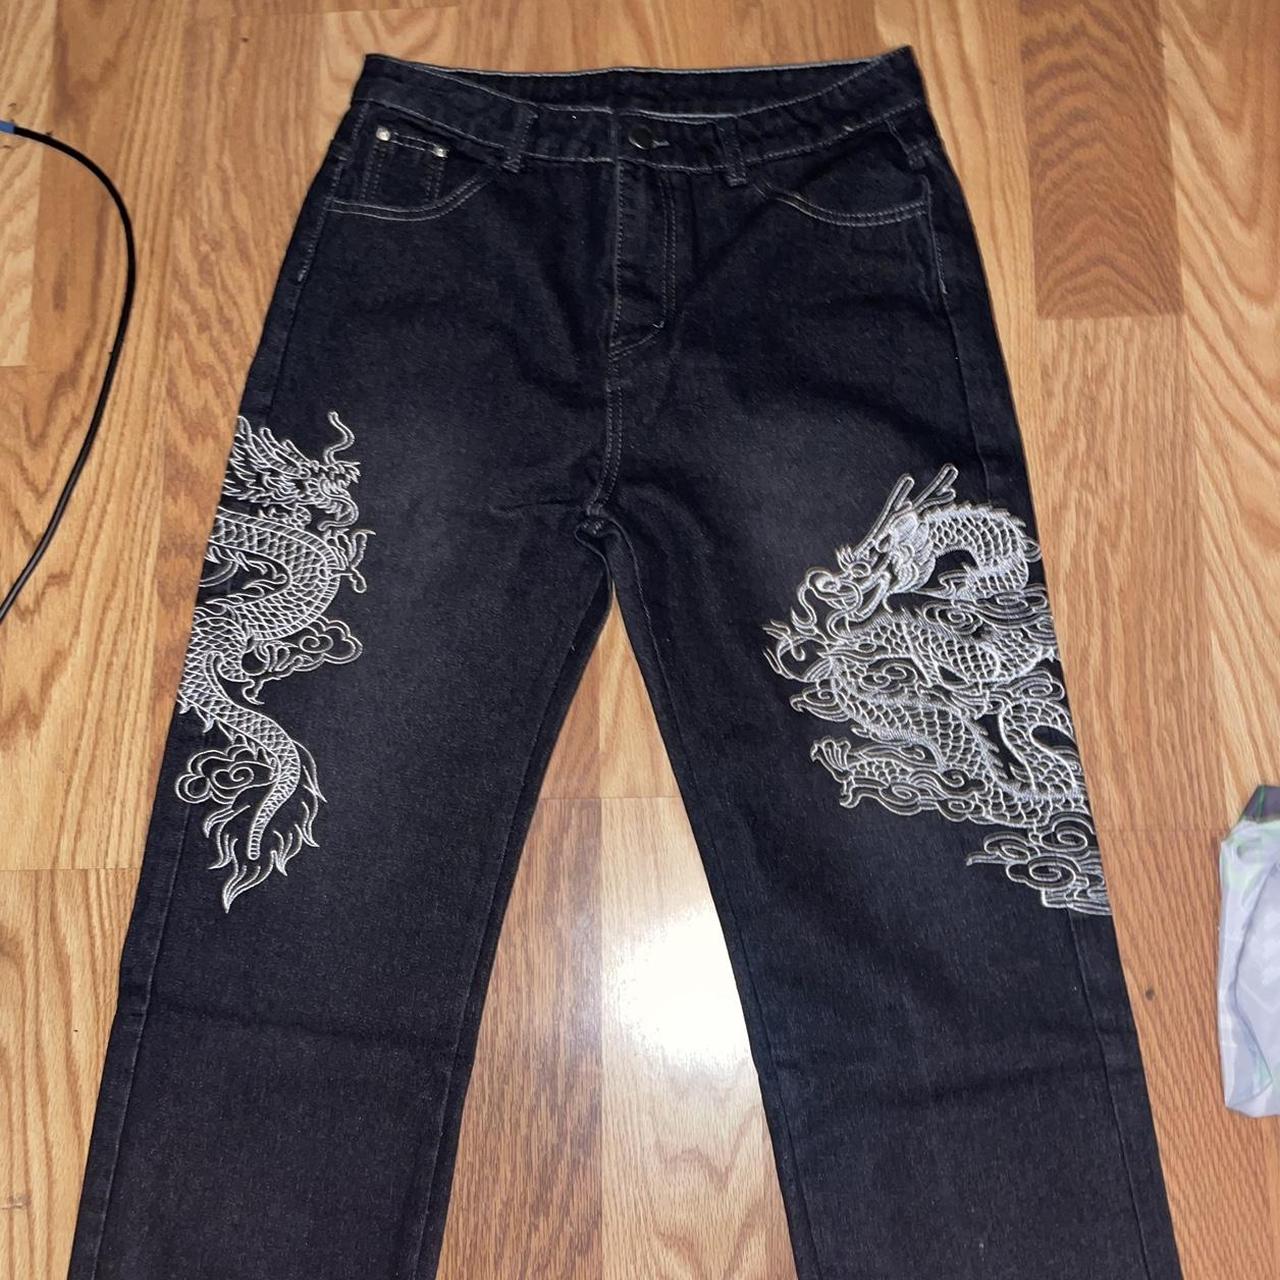 y2k/2000s baggy black embroidered dragon jeans the... - Depop